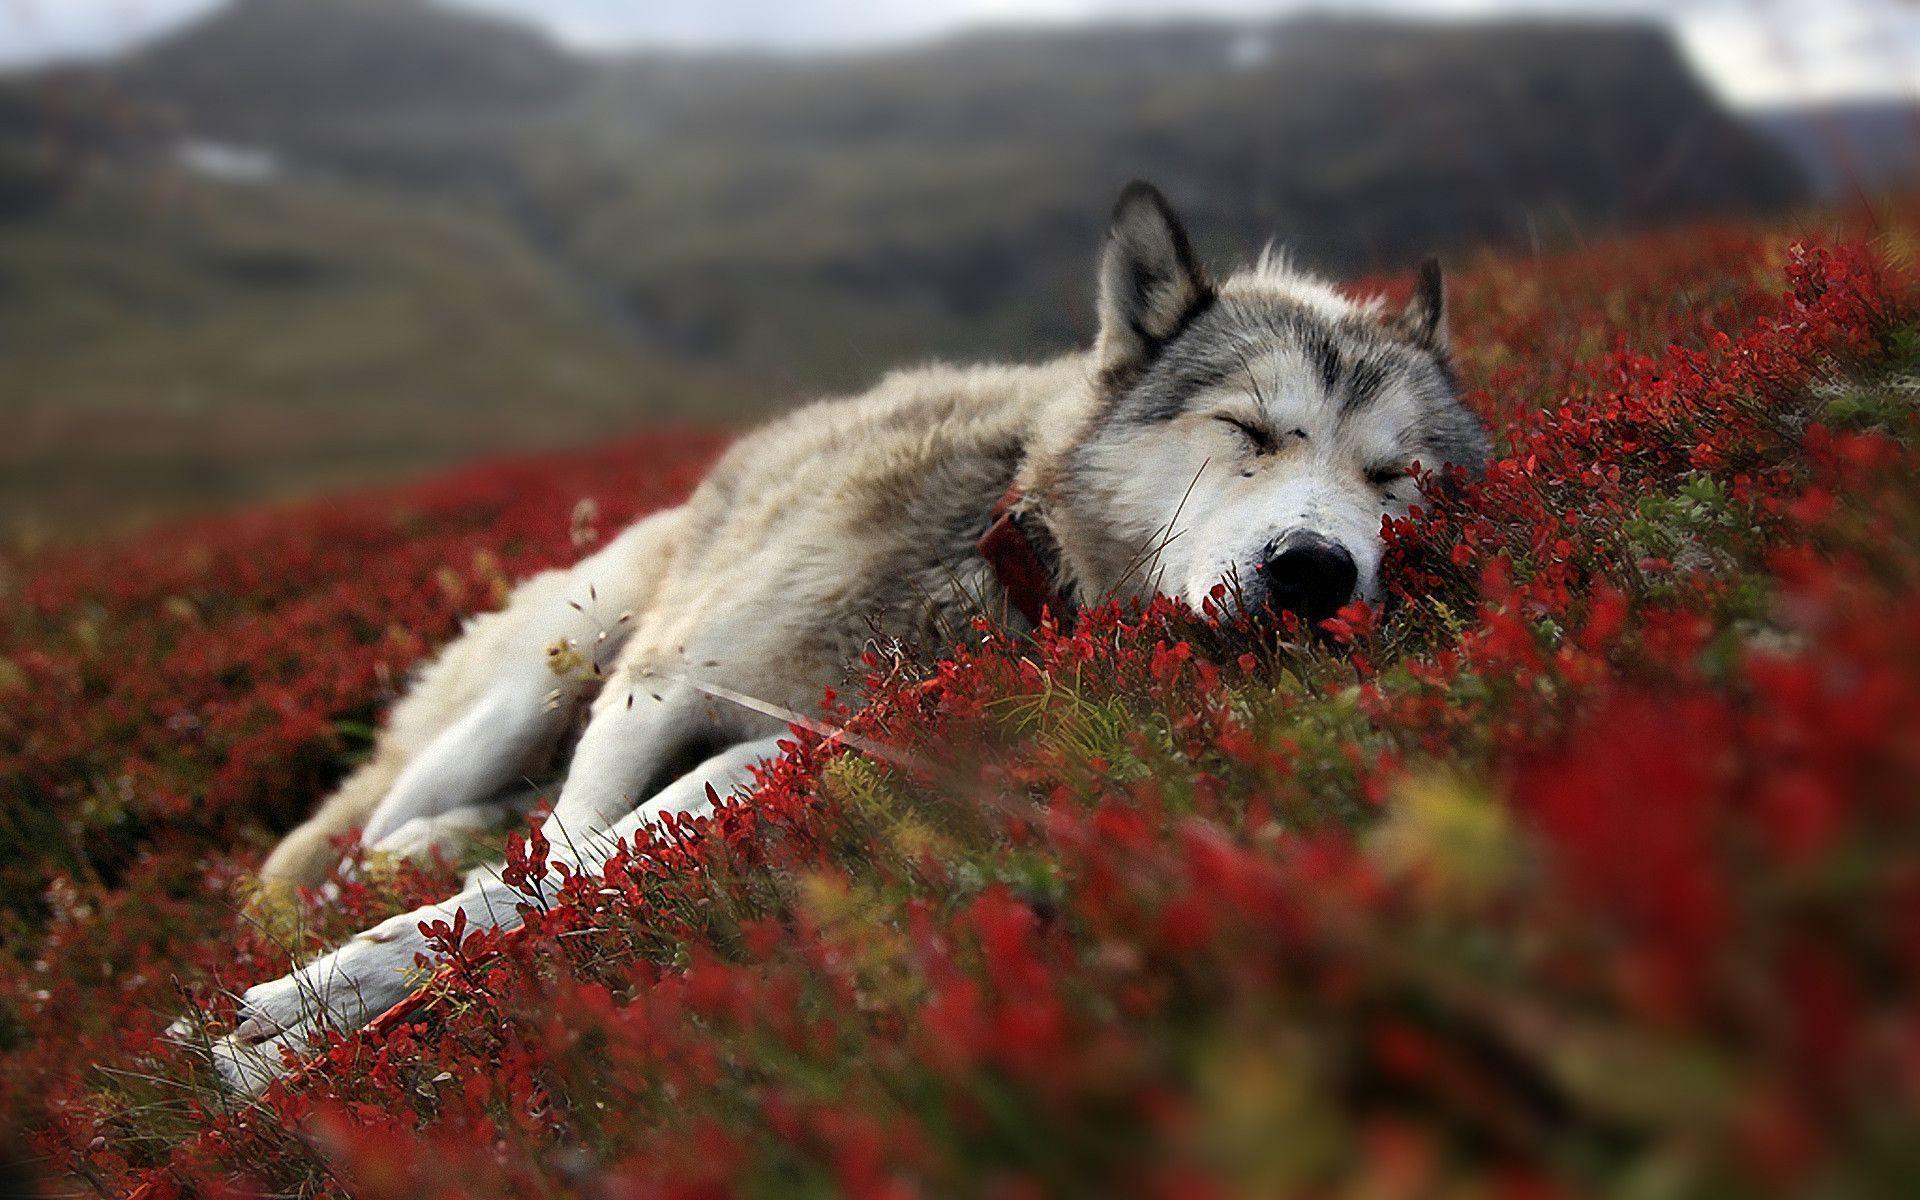 Wolf Wallpapers HD